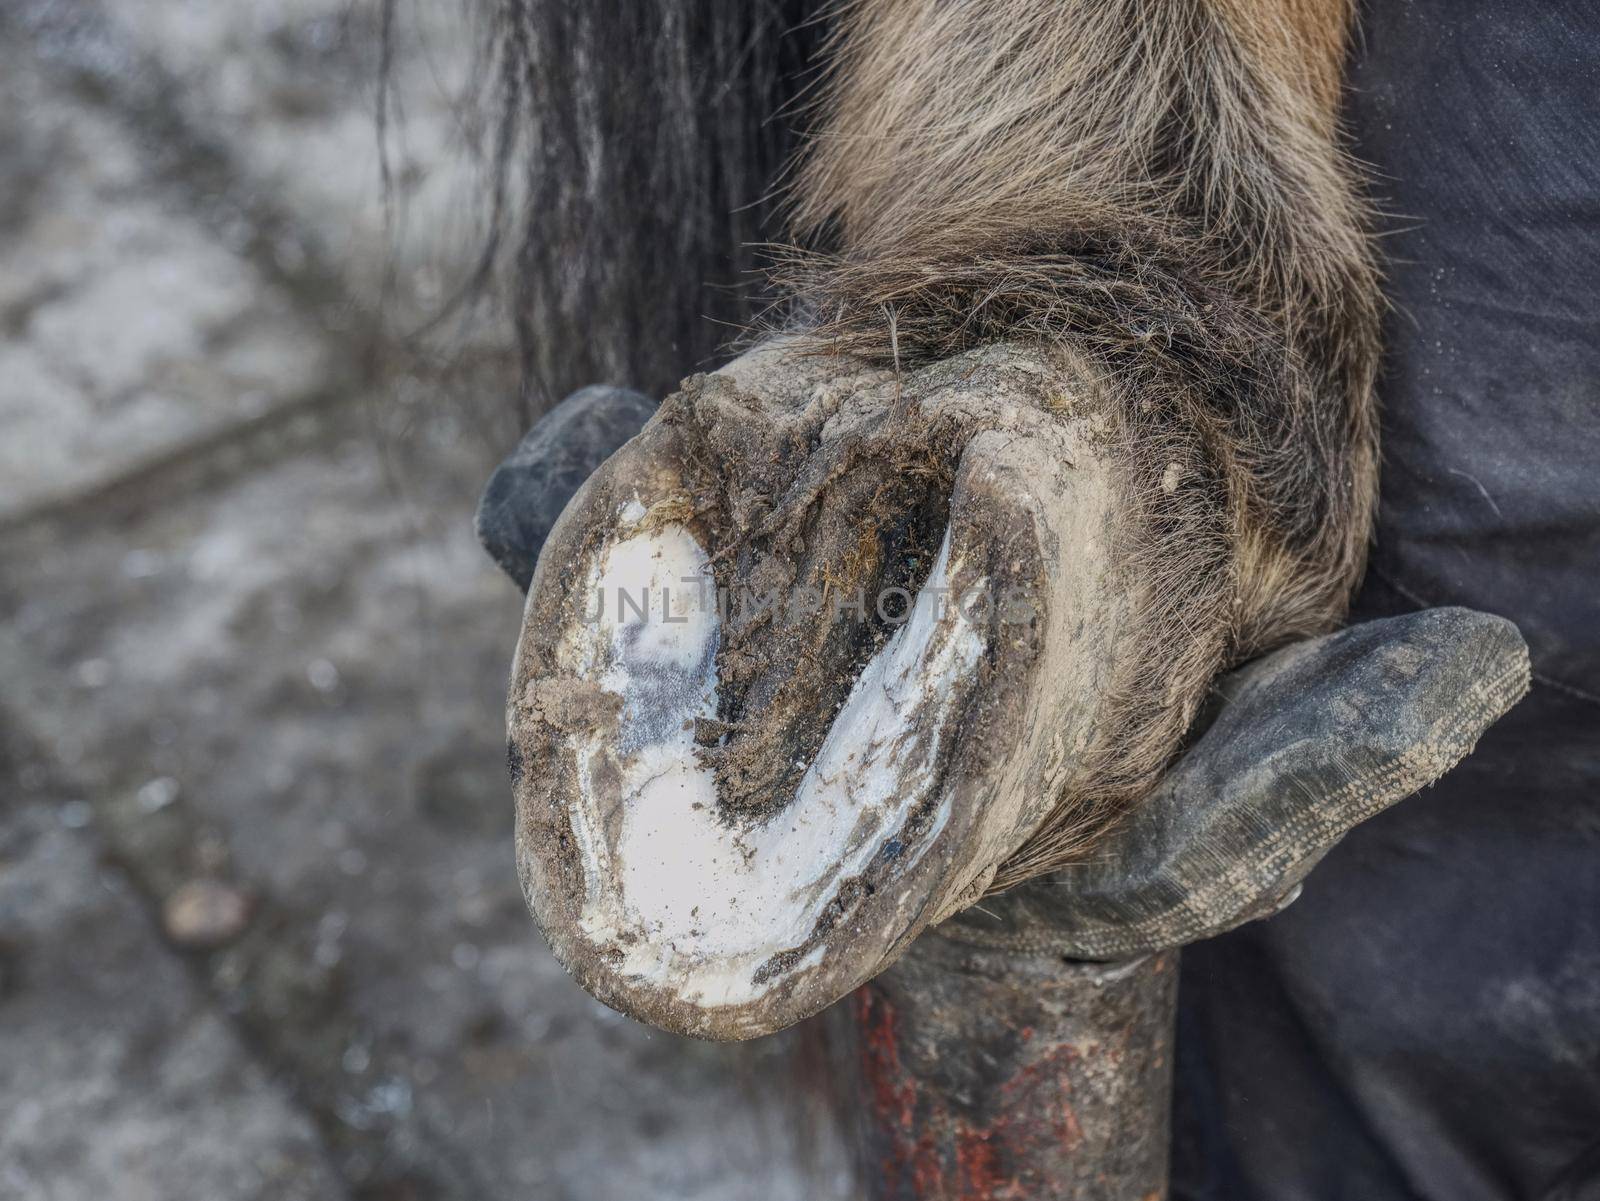 Horse nail - hoof care. The master farrier check keratin, trimming and balancing horses hooves. Blacksmith farrier